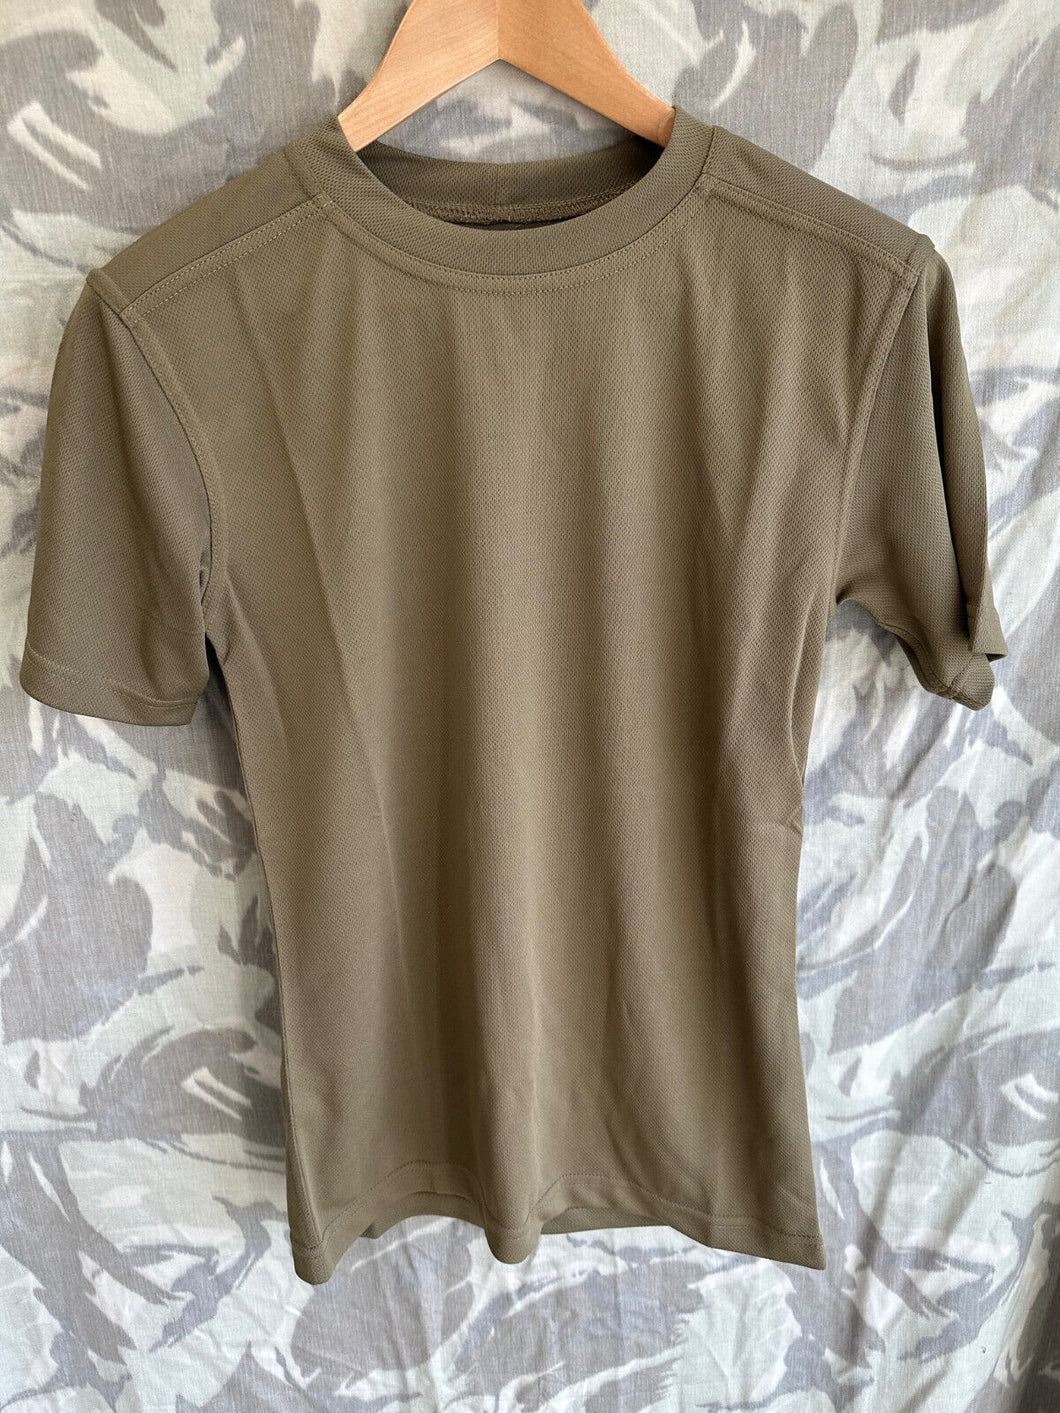 British Army Thermal Underwear T-Shirt Short Sleeve - New Old Stock - 160/80